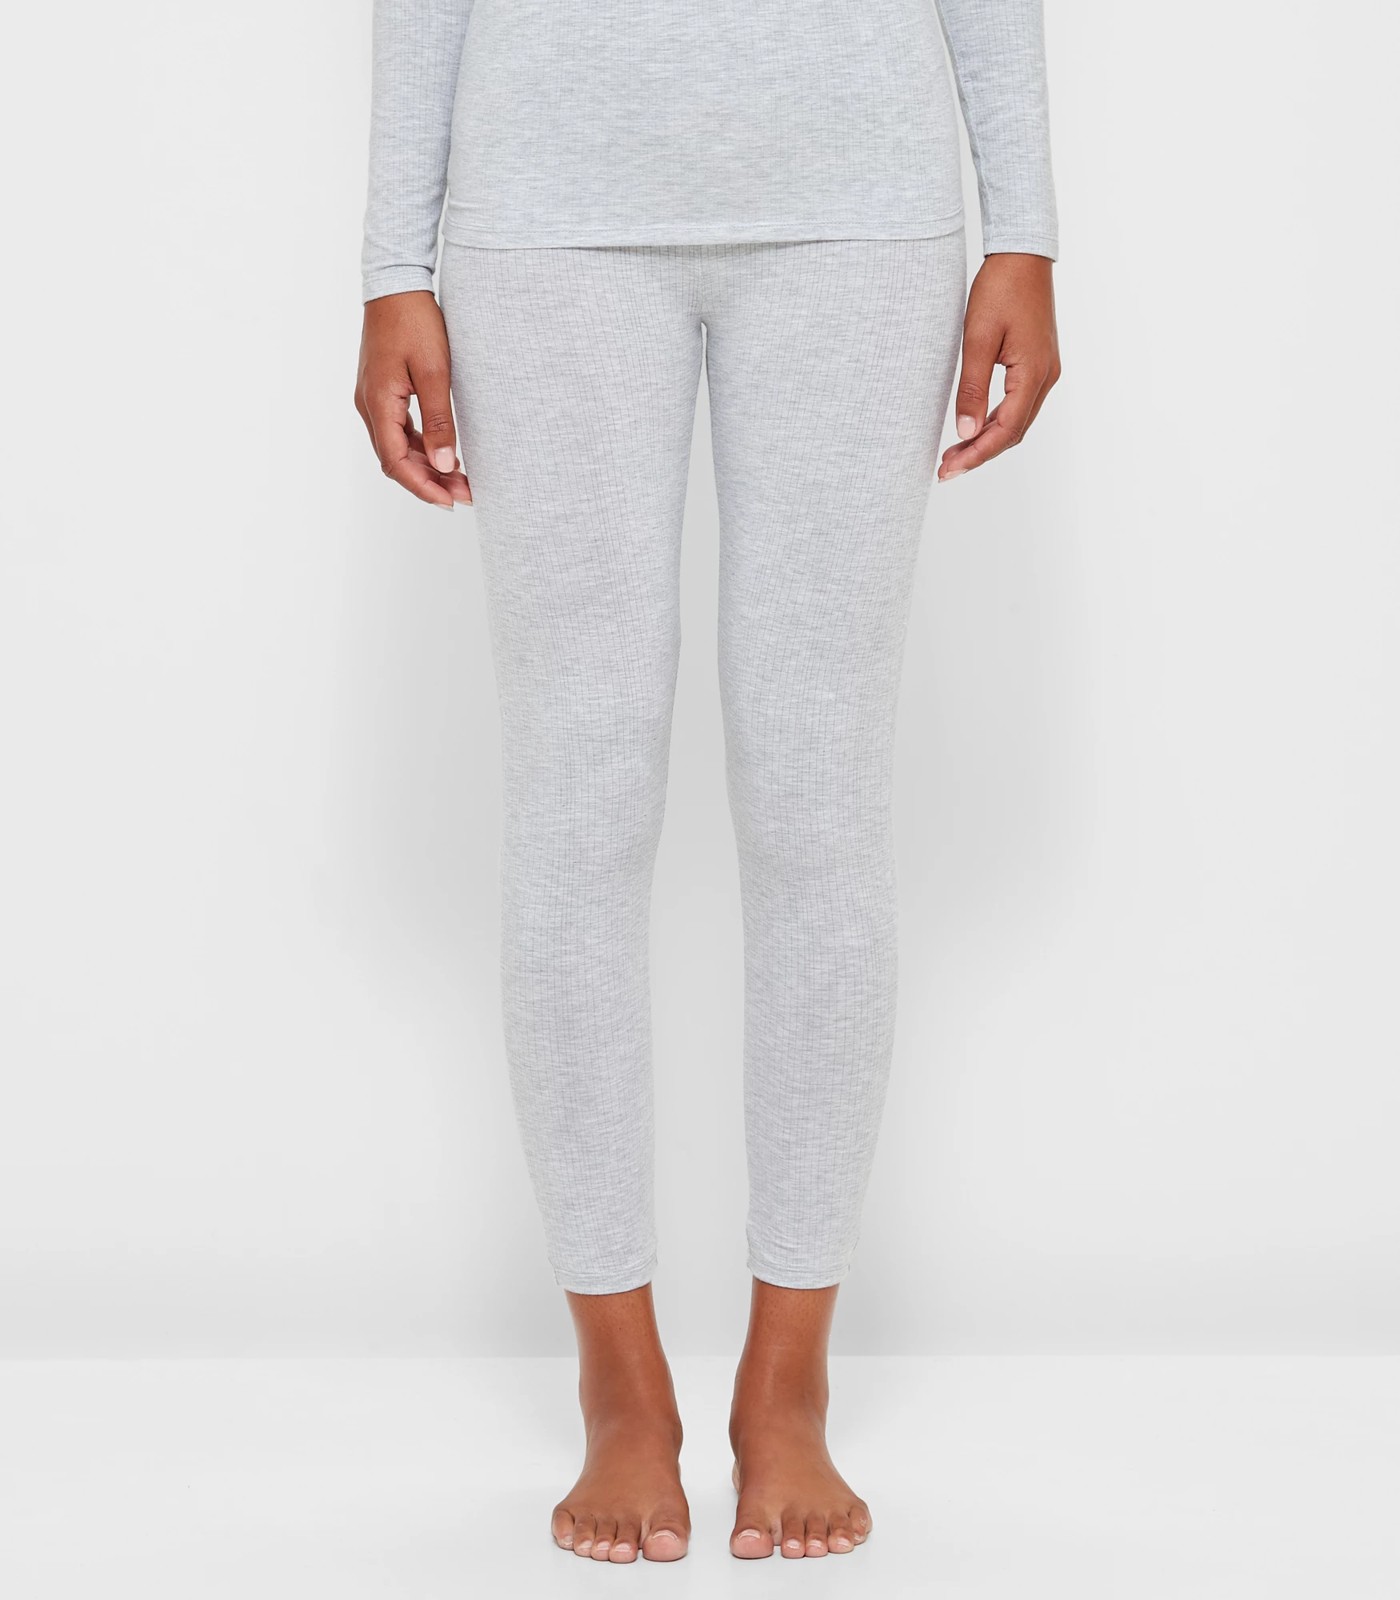 Joggers – Light Grey Marle – Cotton Cashmere -(part of a matching